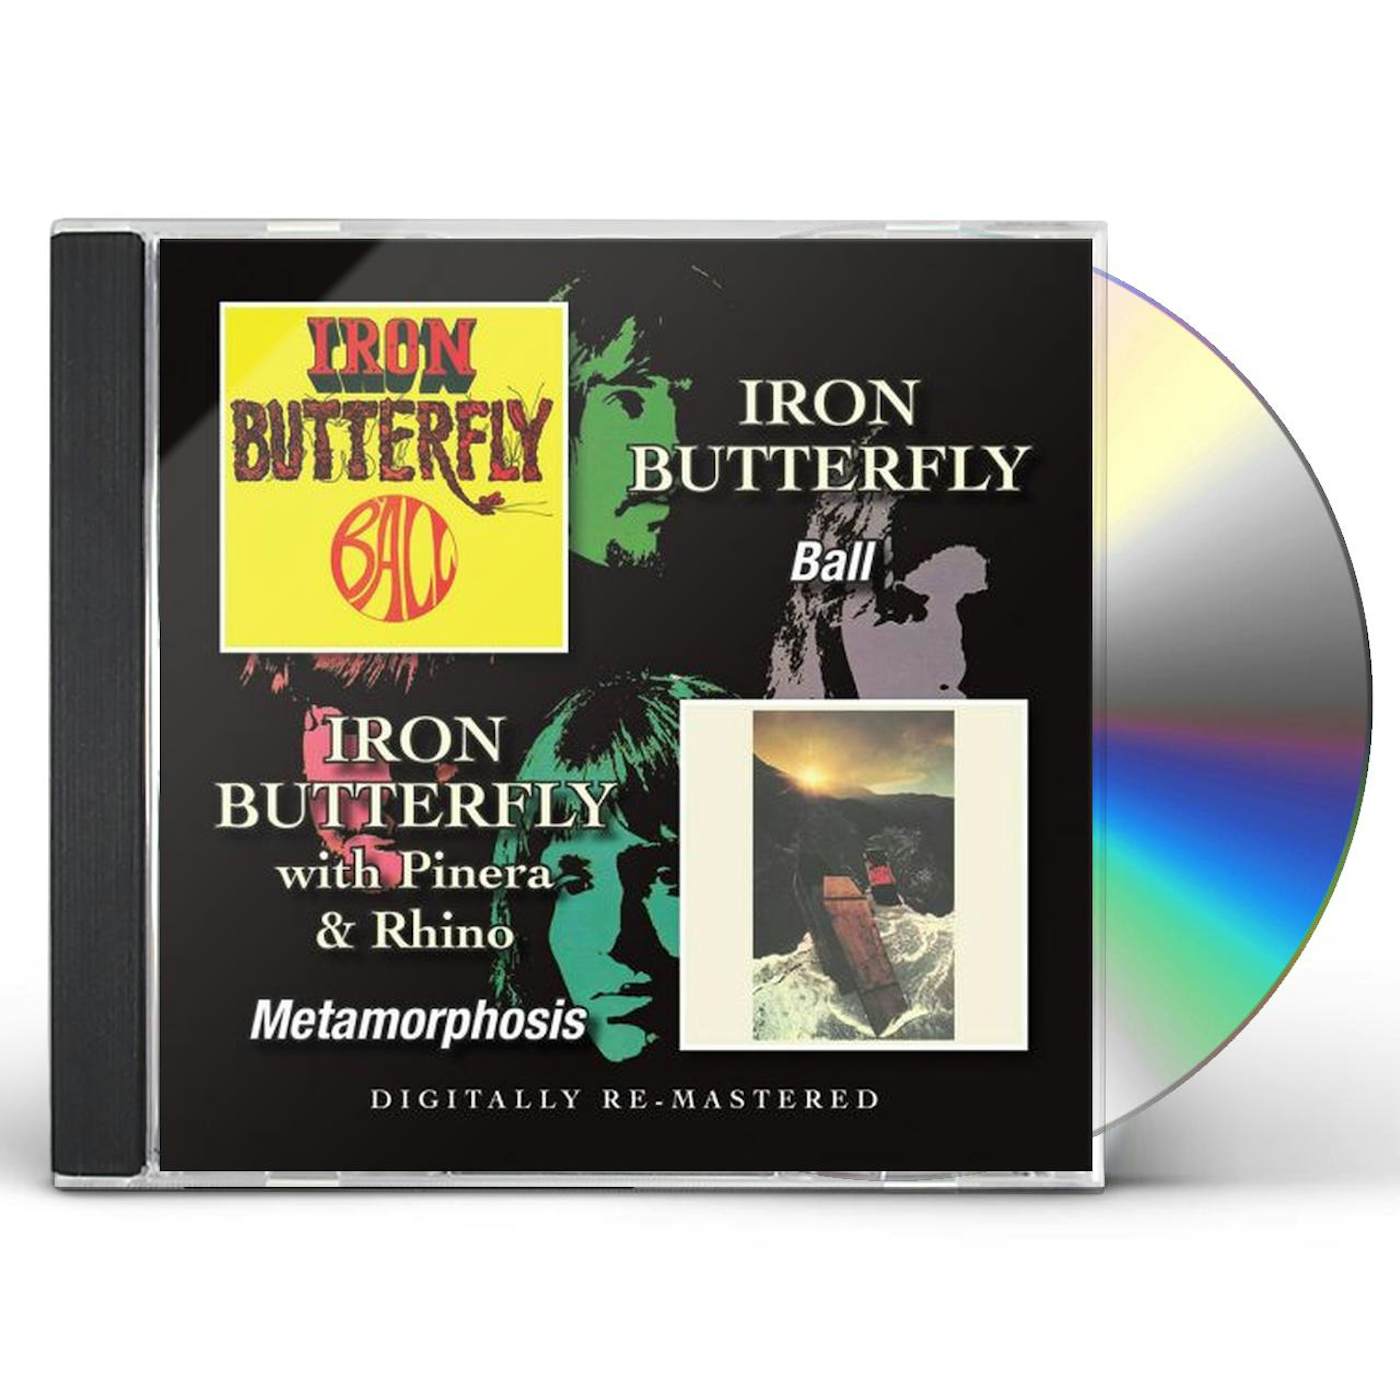 ball / metamorphosis (remastered) cd - Iron Butterfly